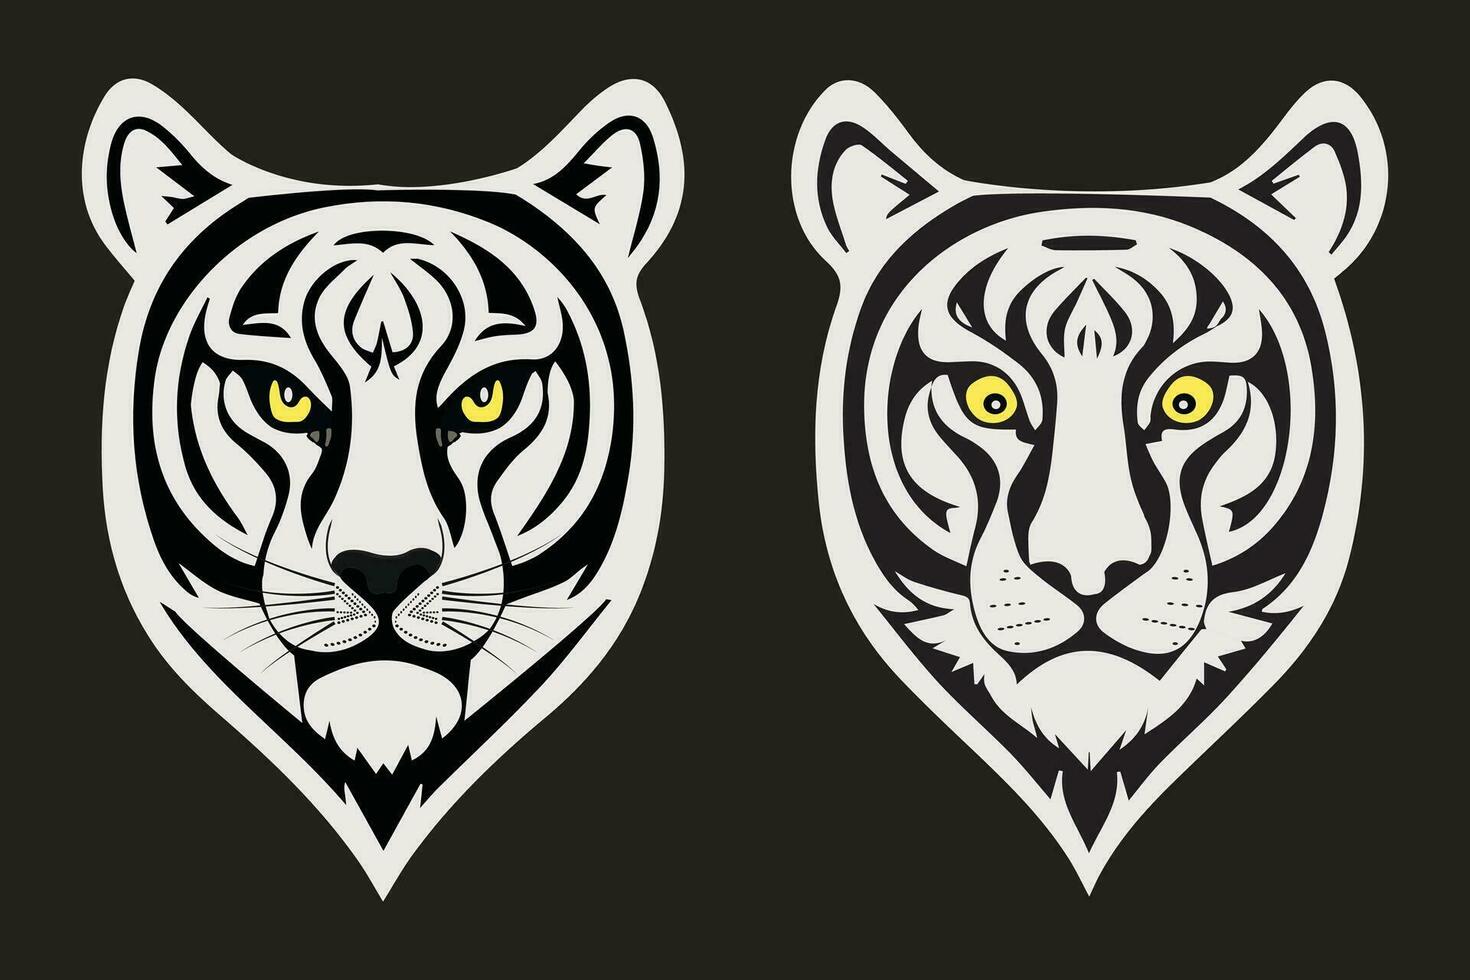 Tiger head black and white simple vector art